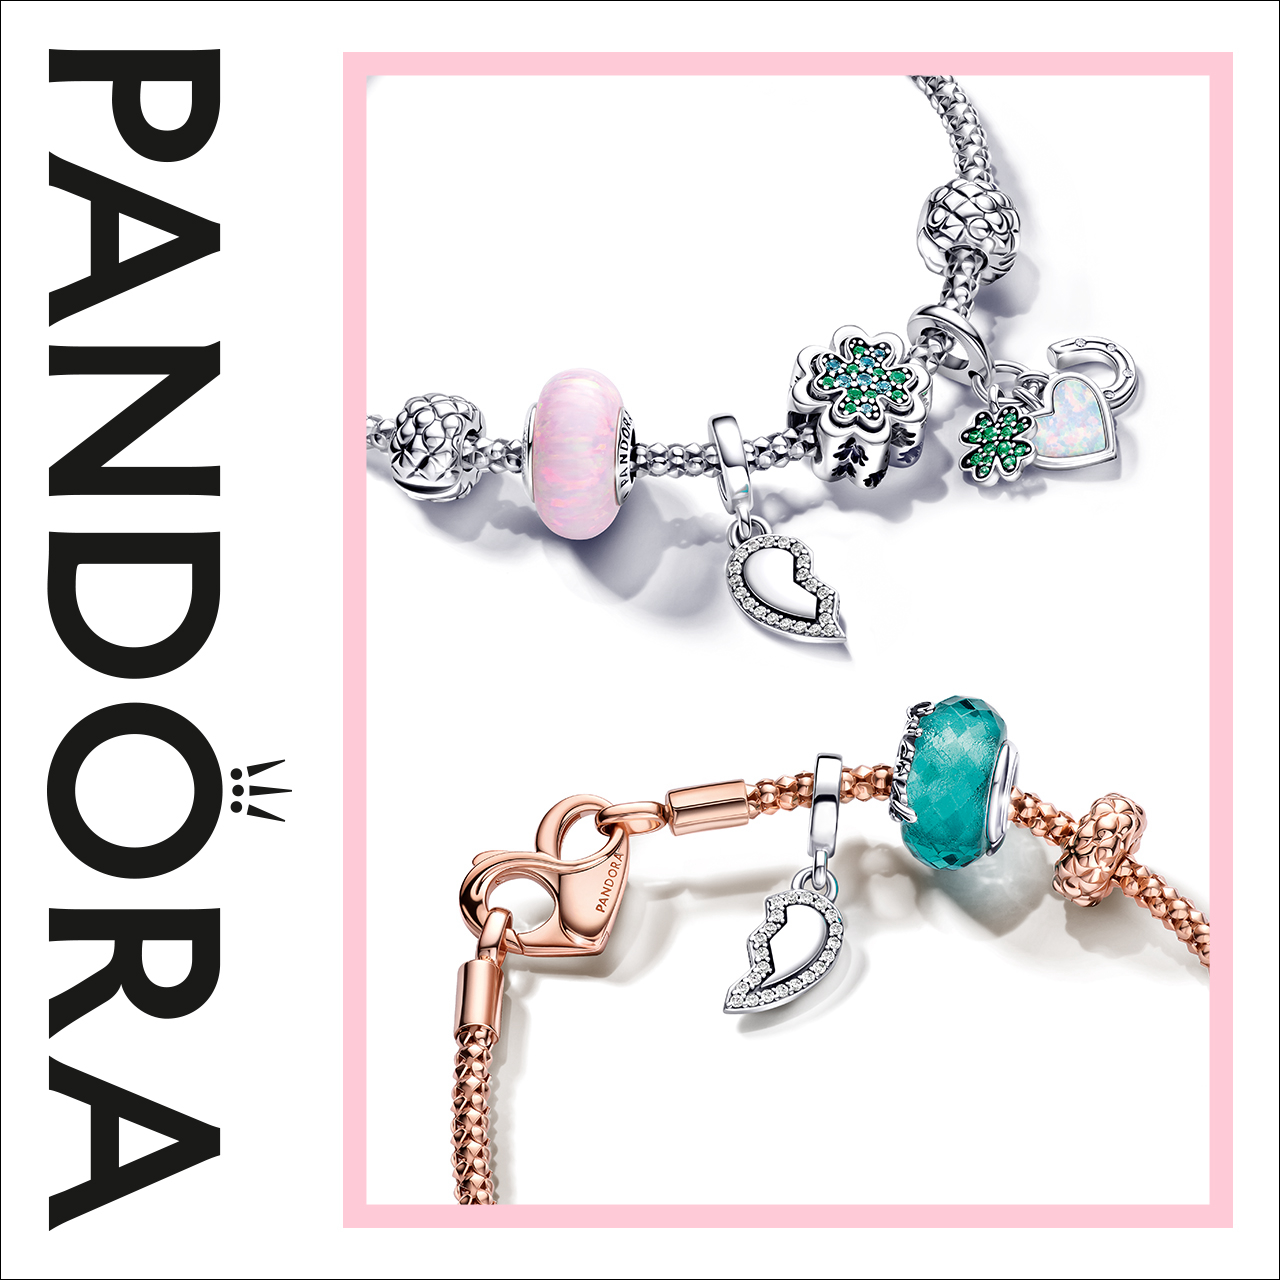 Pandora Campaign 108 Shareable charms for you and your favorite people. EN 1280x1280 1